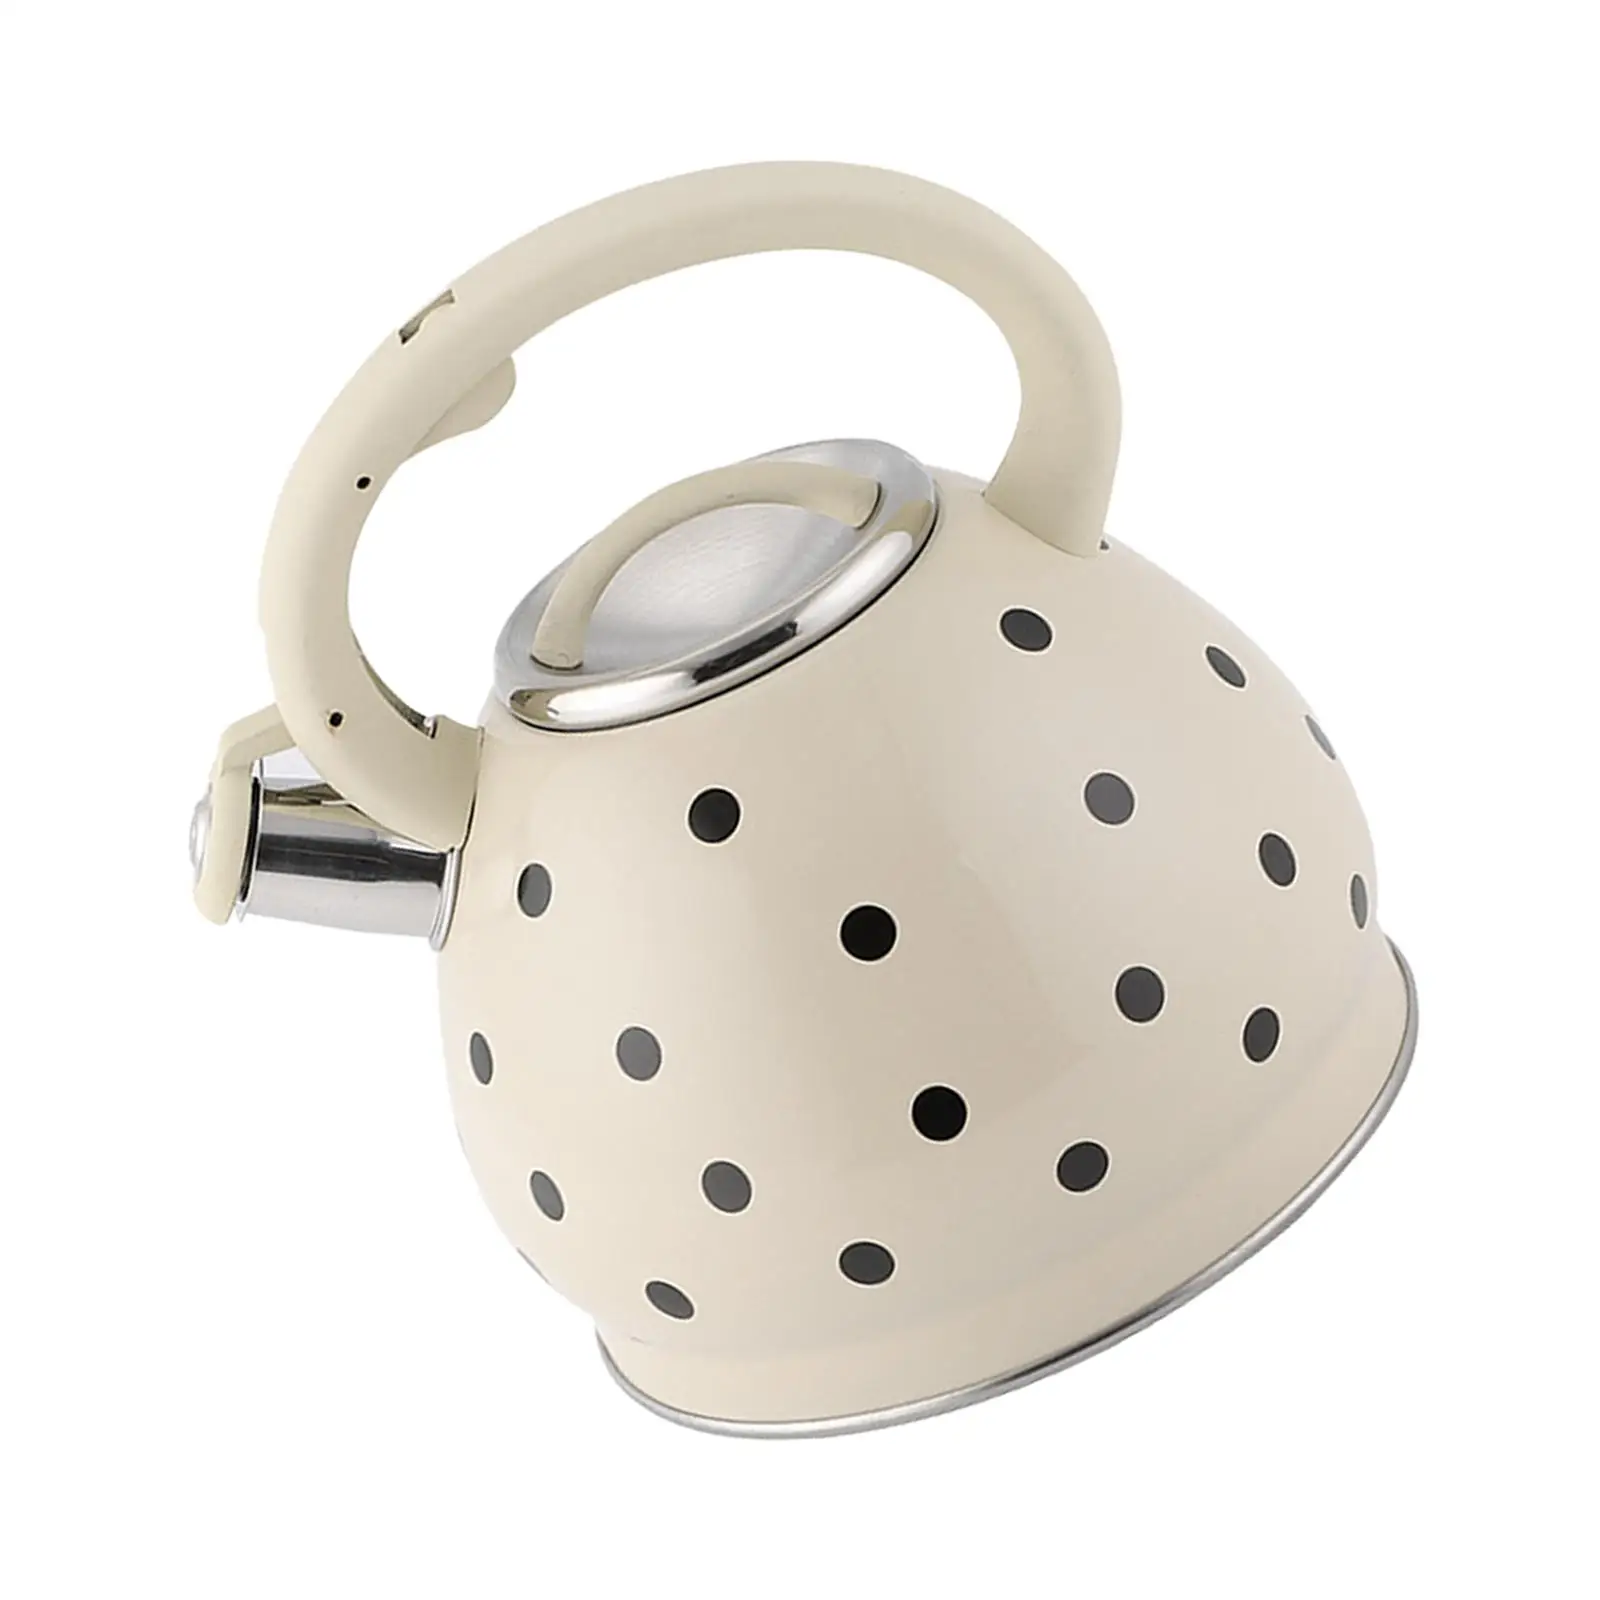 Multifunctional Whistling Kettle 5L Large Capacity with Wooden  Picnic Tea Pot Tea Kettle for Home Hiking Picnic